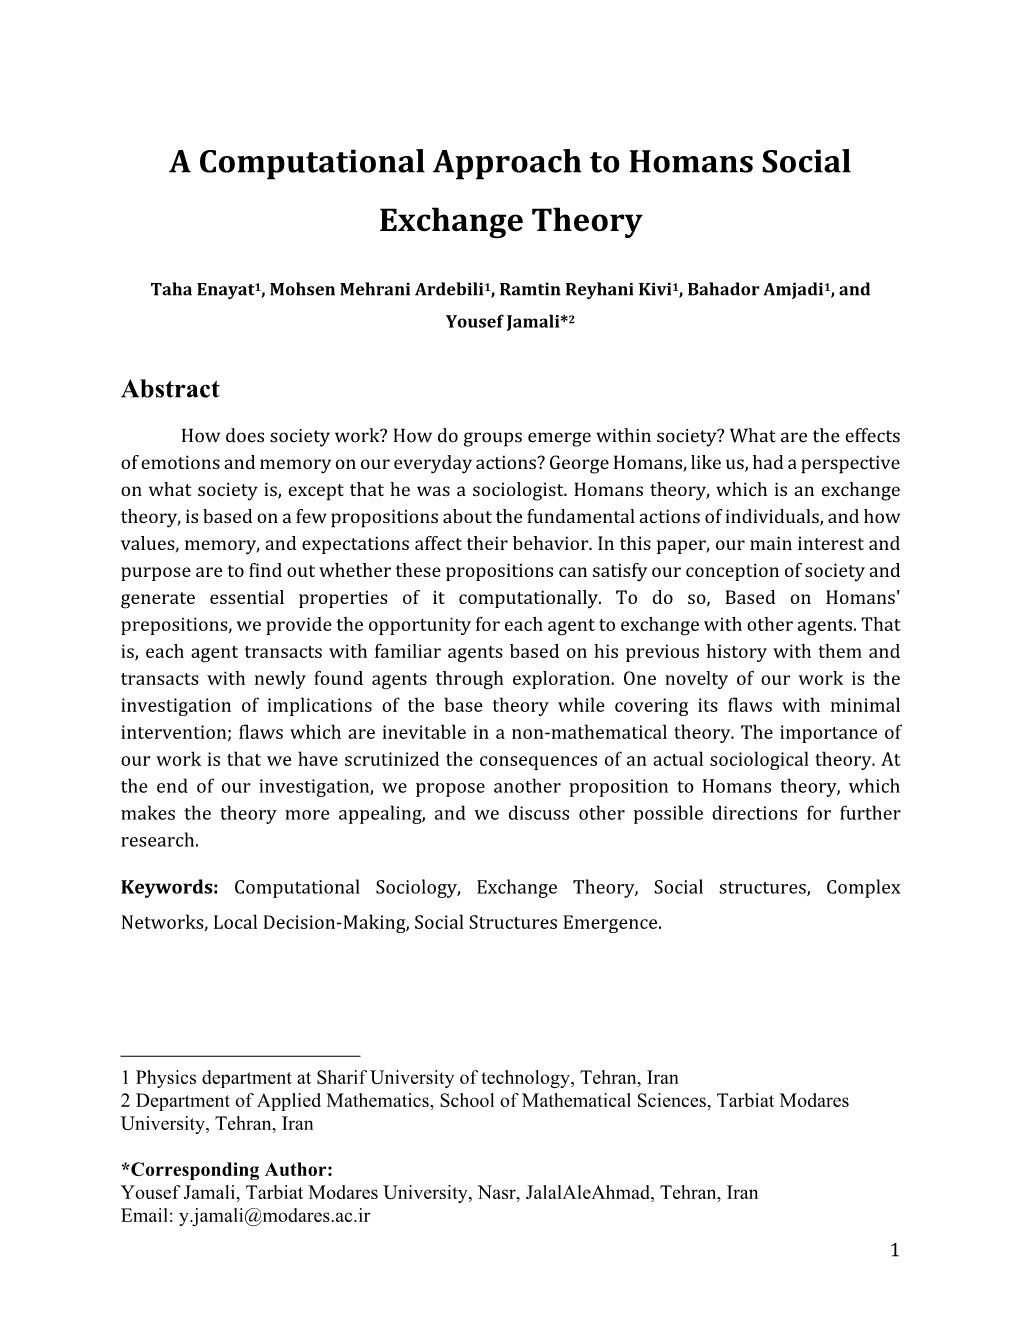 A Computational Approach to Homans Social Exchange Theory